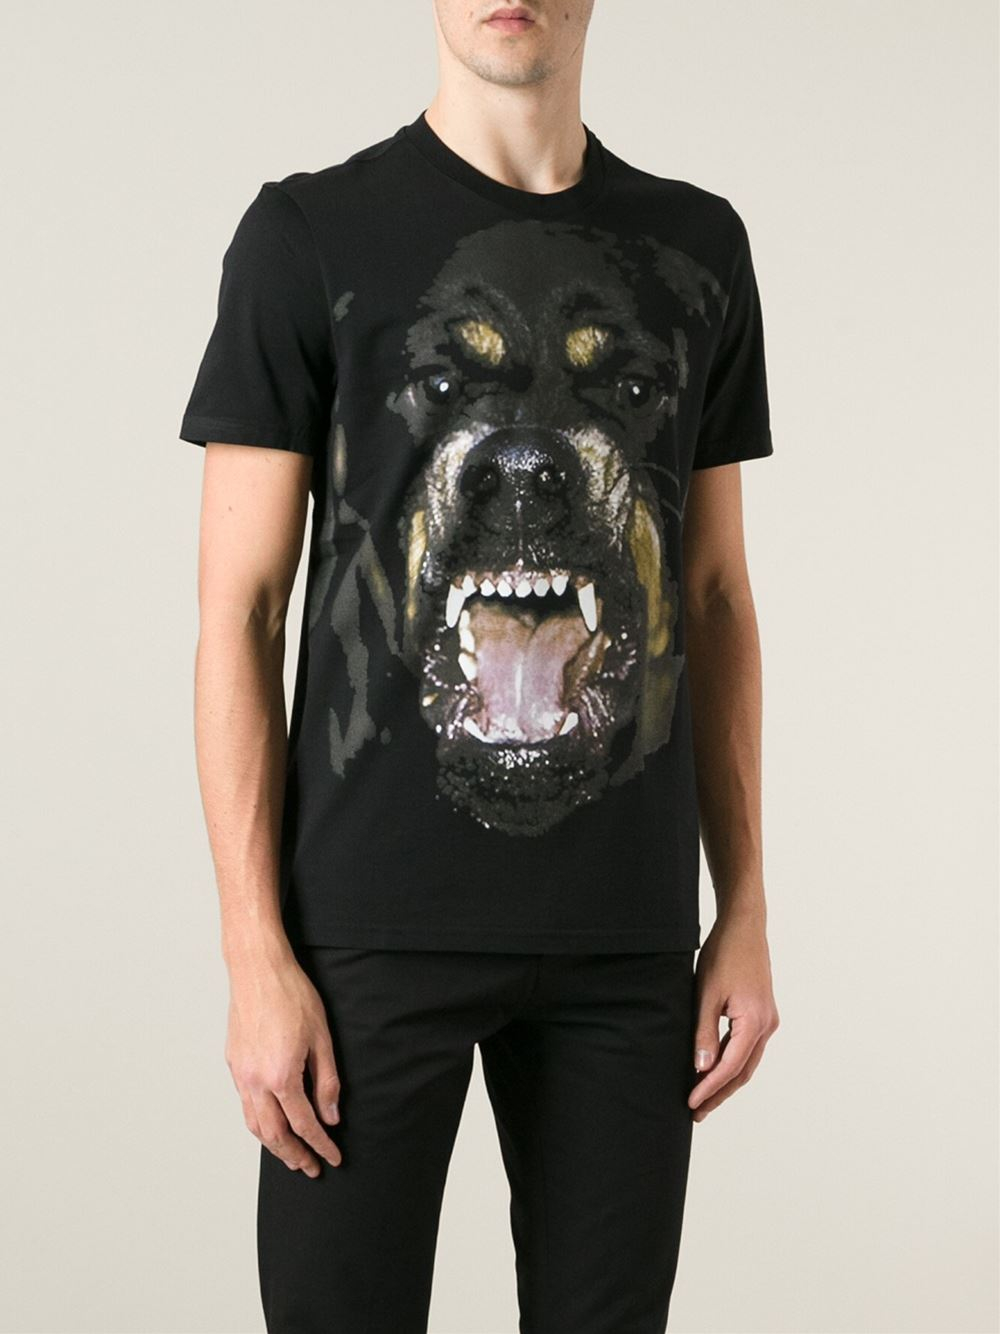 Lyst - Givenchy Rottweiler Cotton T-Shirt in Black for Men